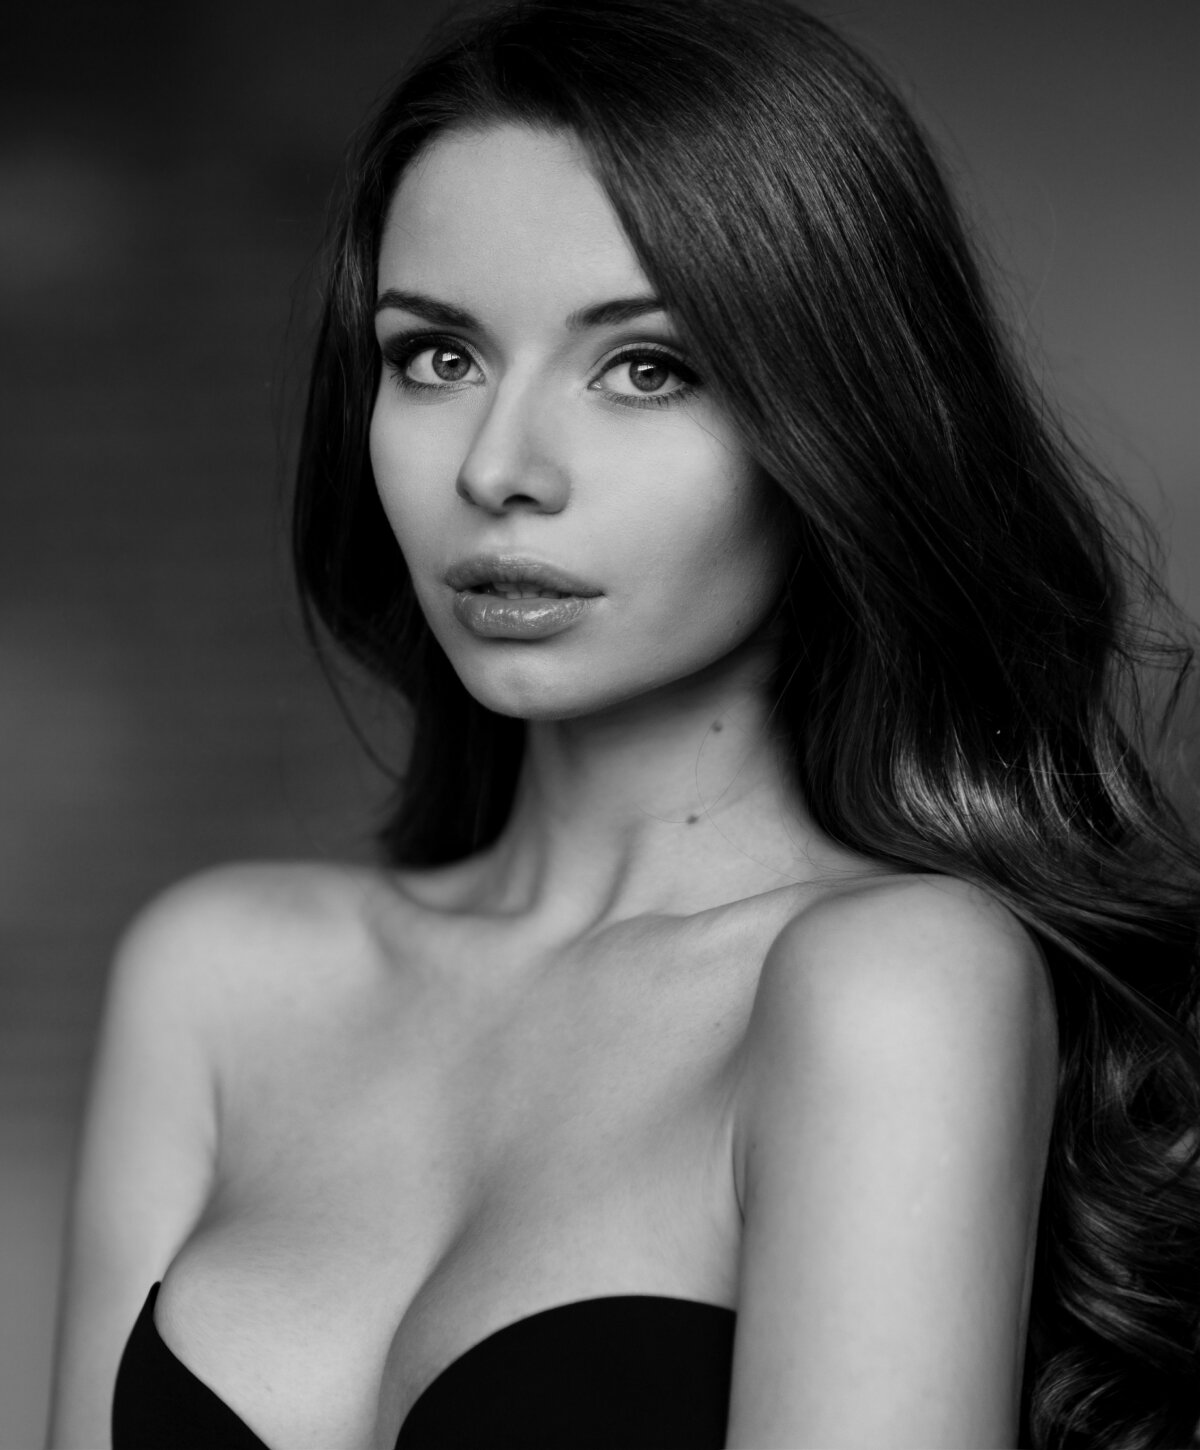 Westlake village breast implant removal model in black and white